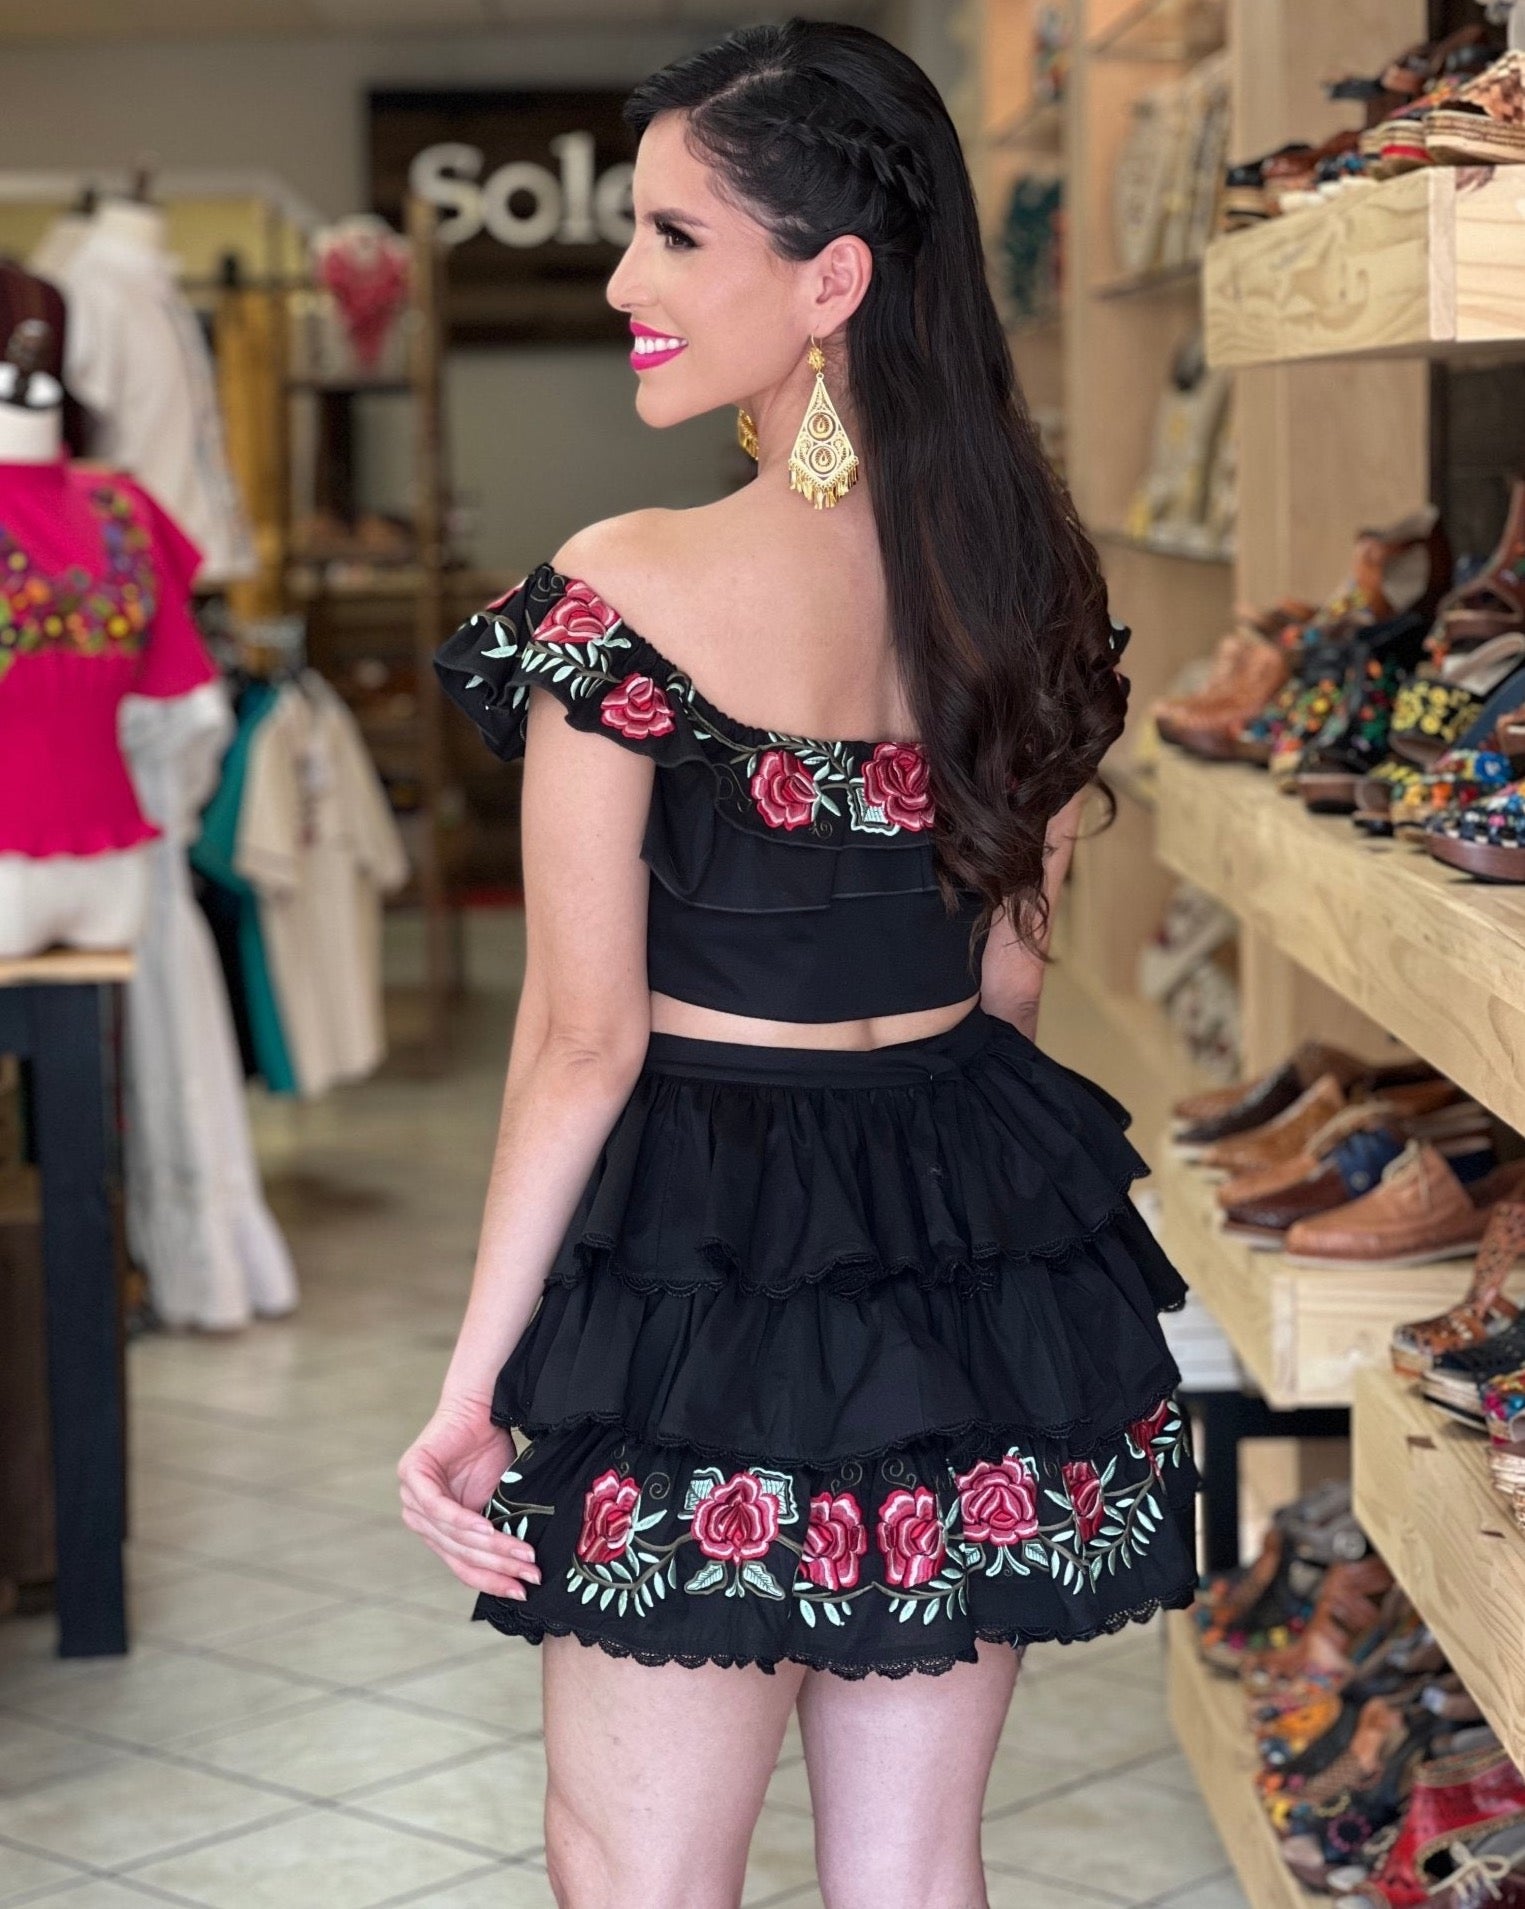 Mexican Floral Embroidered 2 Piece Ruffle Dress. Set Rosa Maria - Solei Store